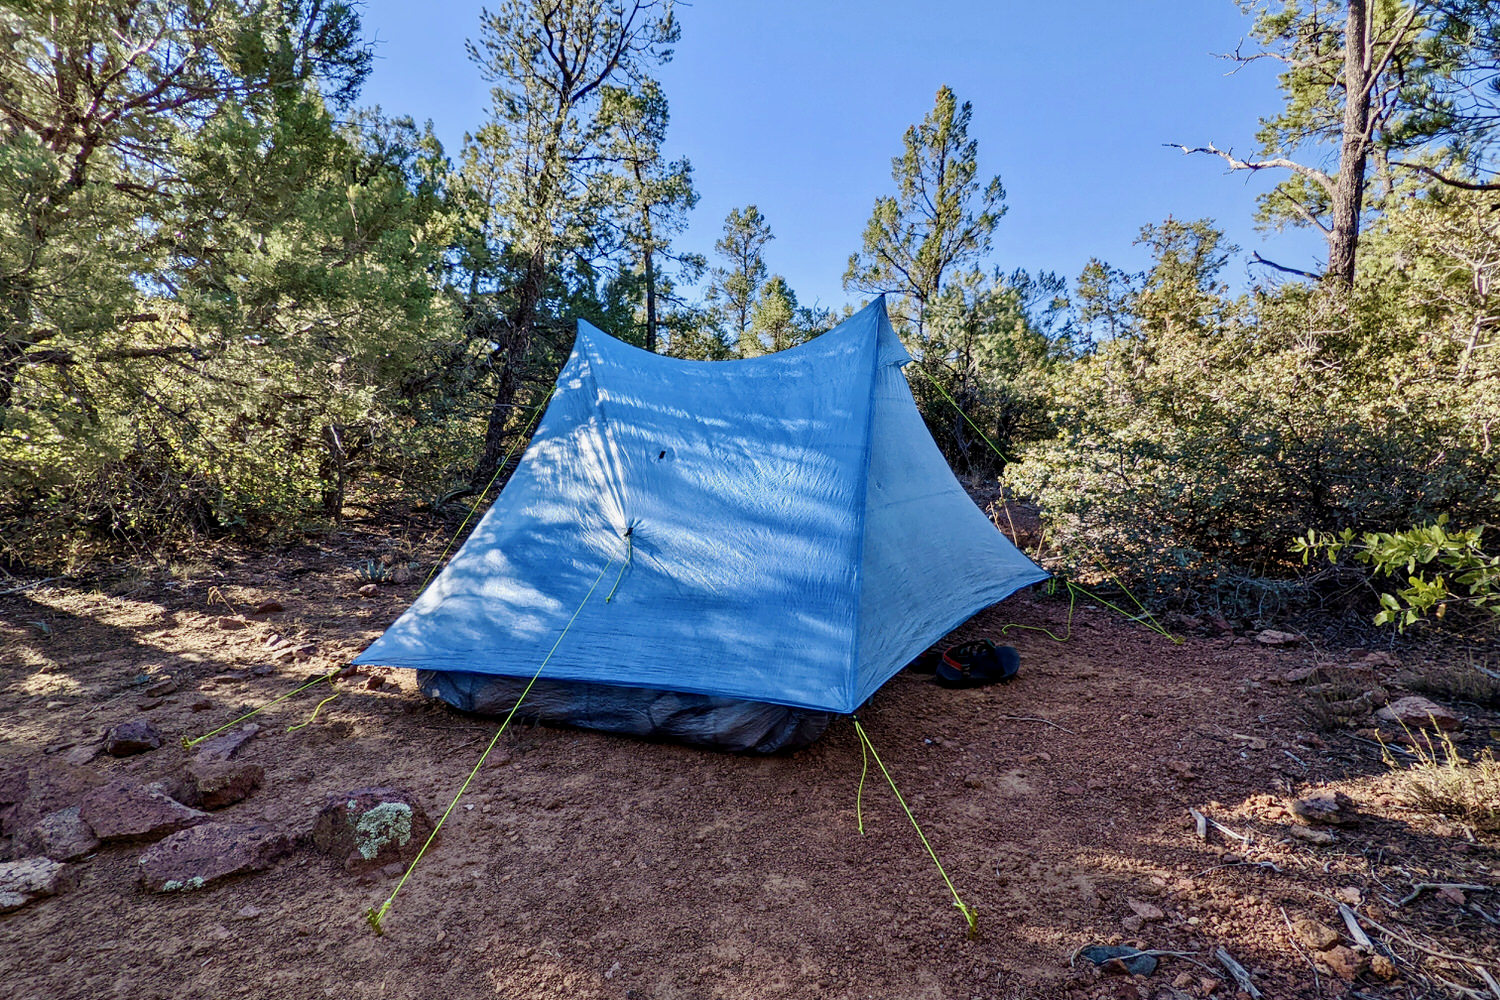 The Zpacks Duplex Zip tent set up among trees with red dirt in the foreground and shadows across the tent 